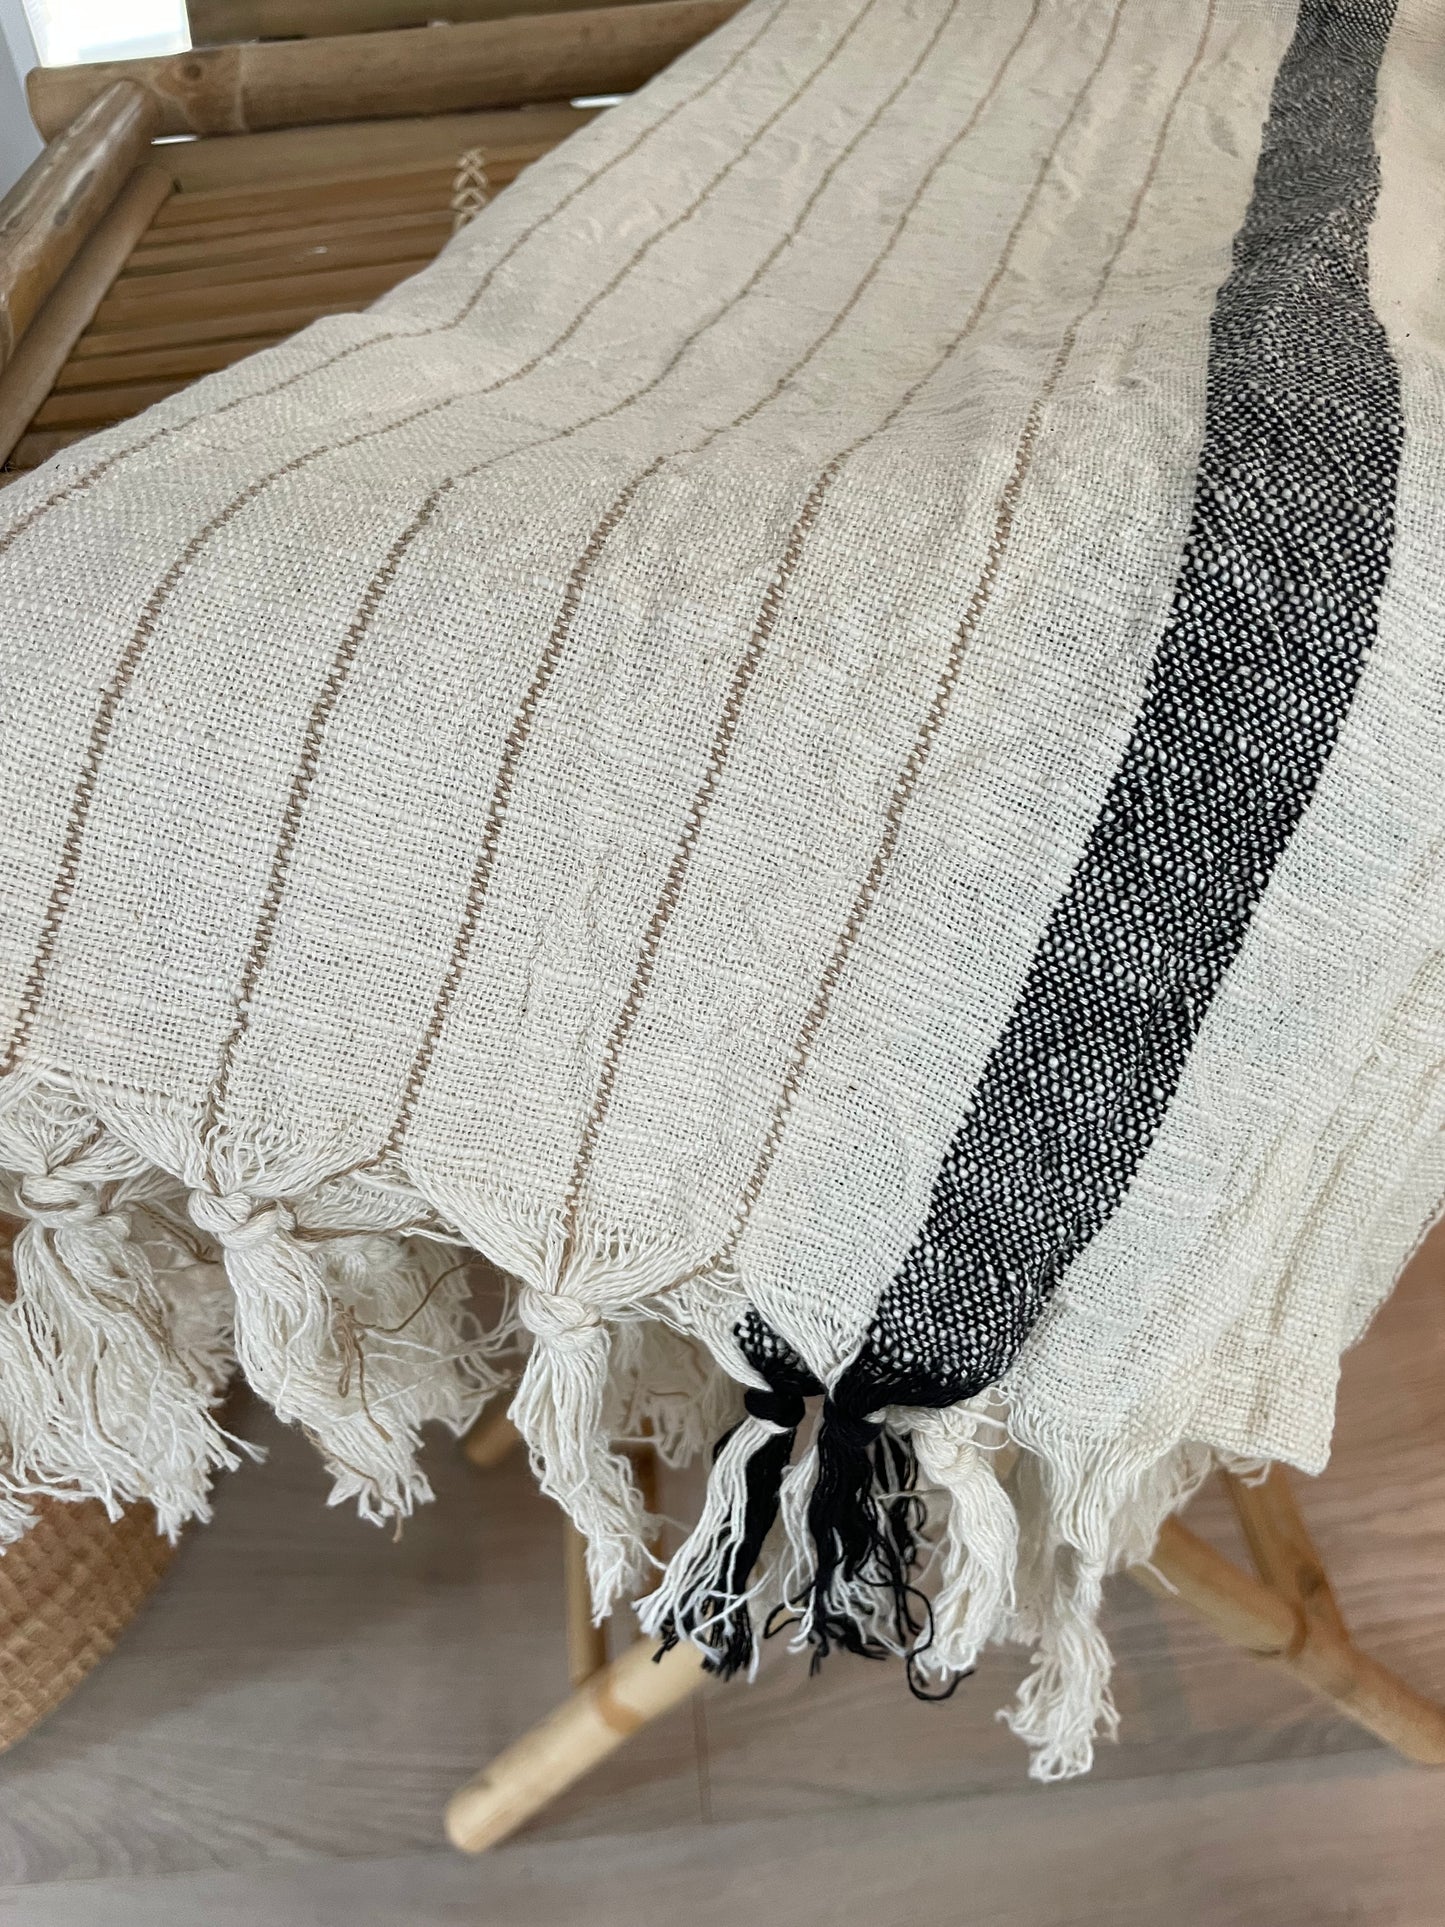 Hamam woven towels in 100% locally harvested cotton. Fair Trade from Syria